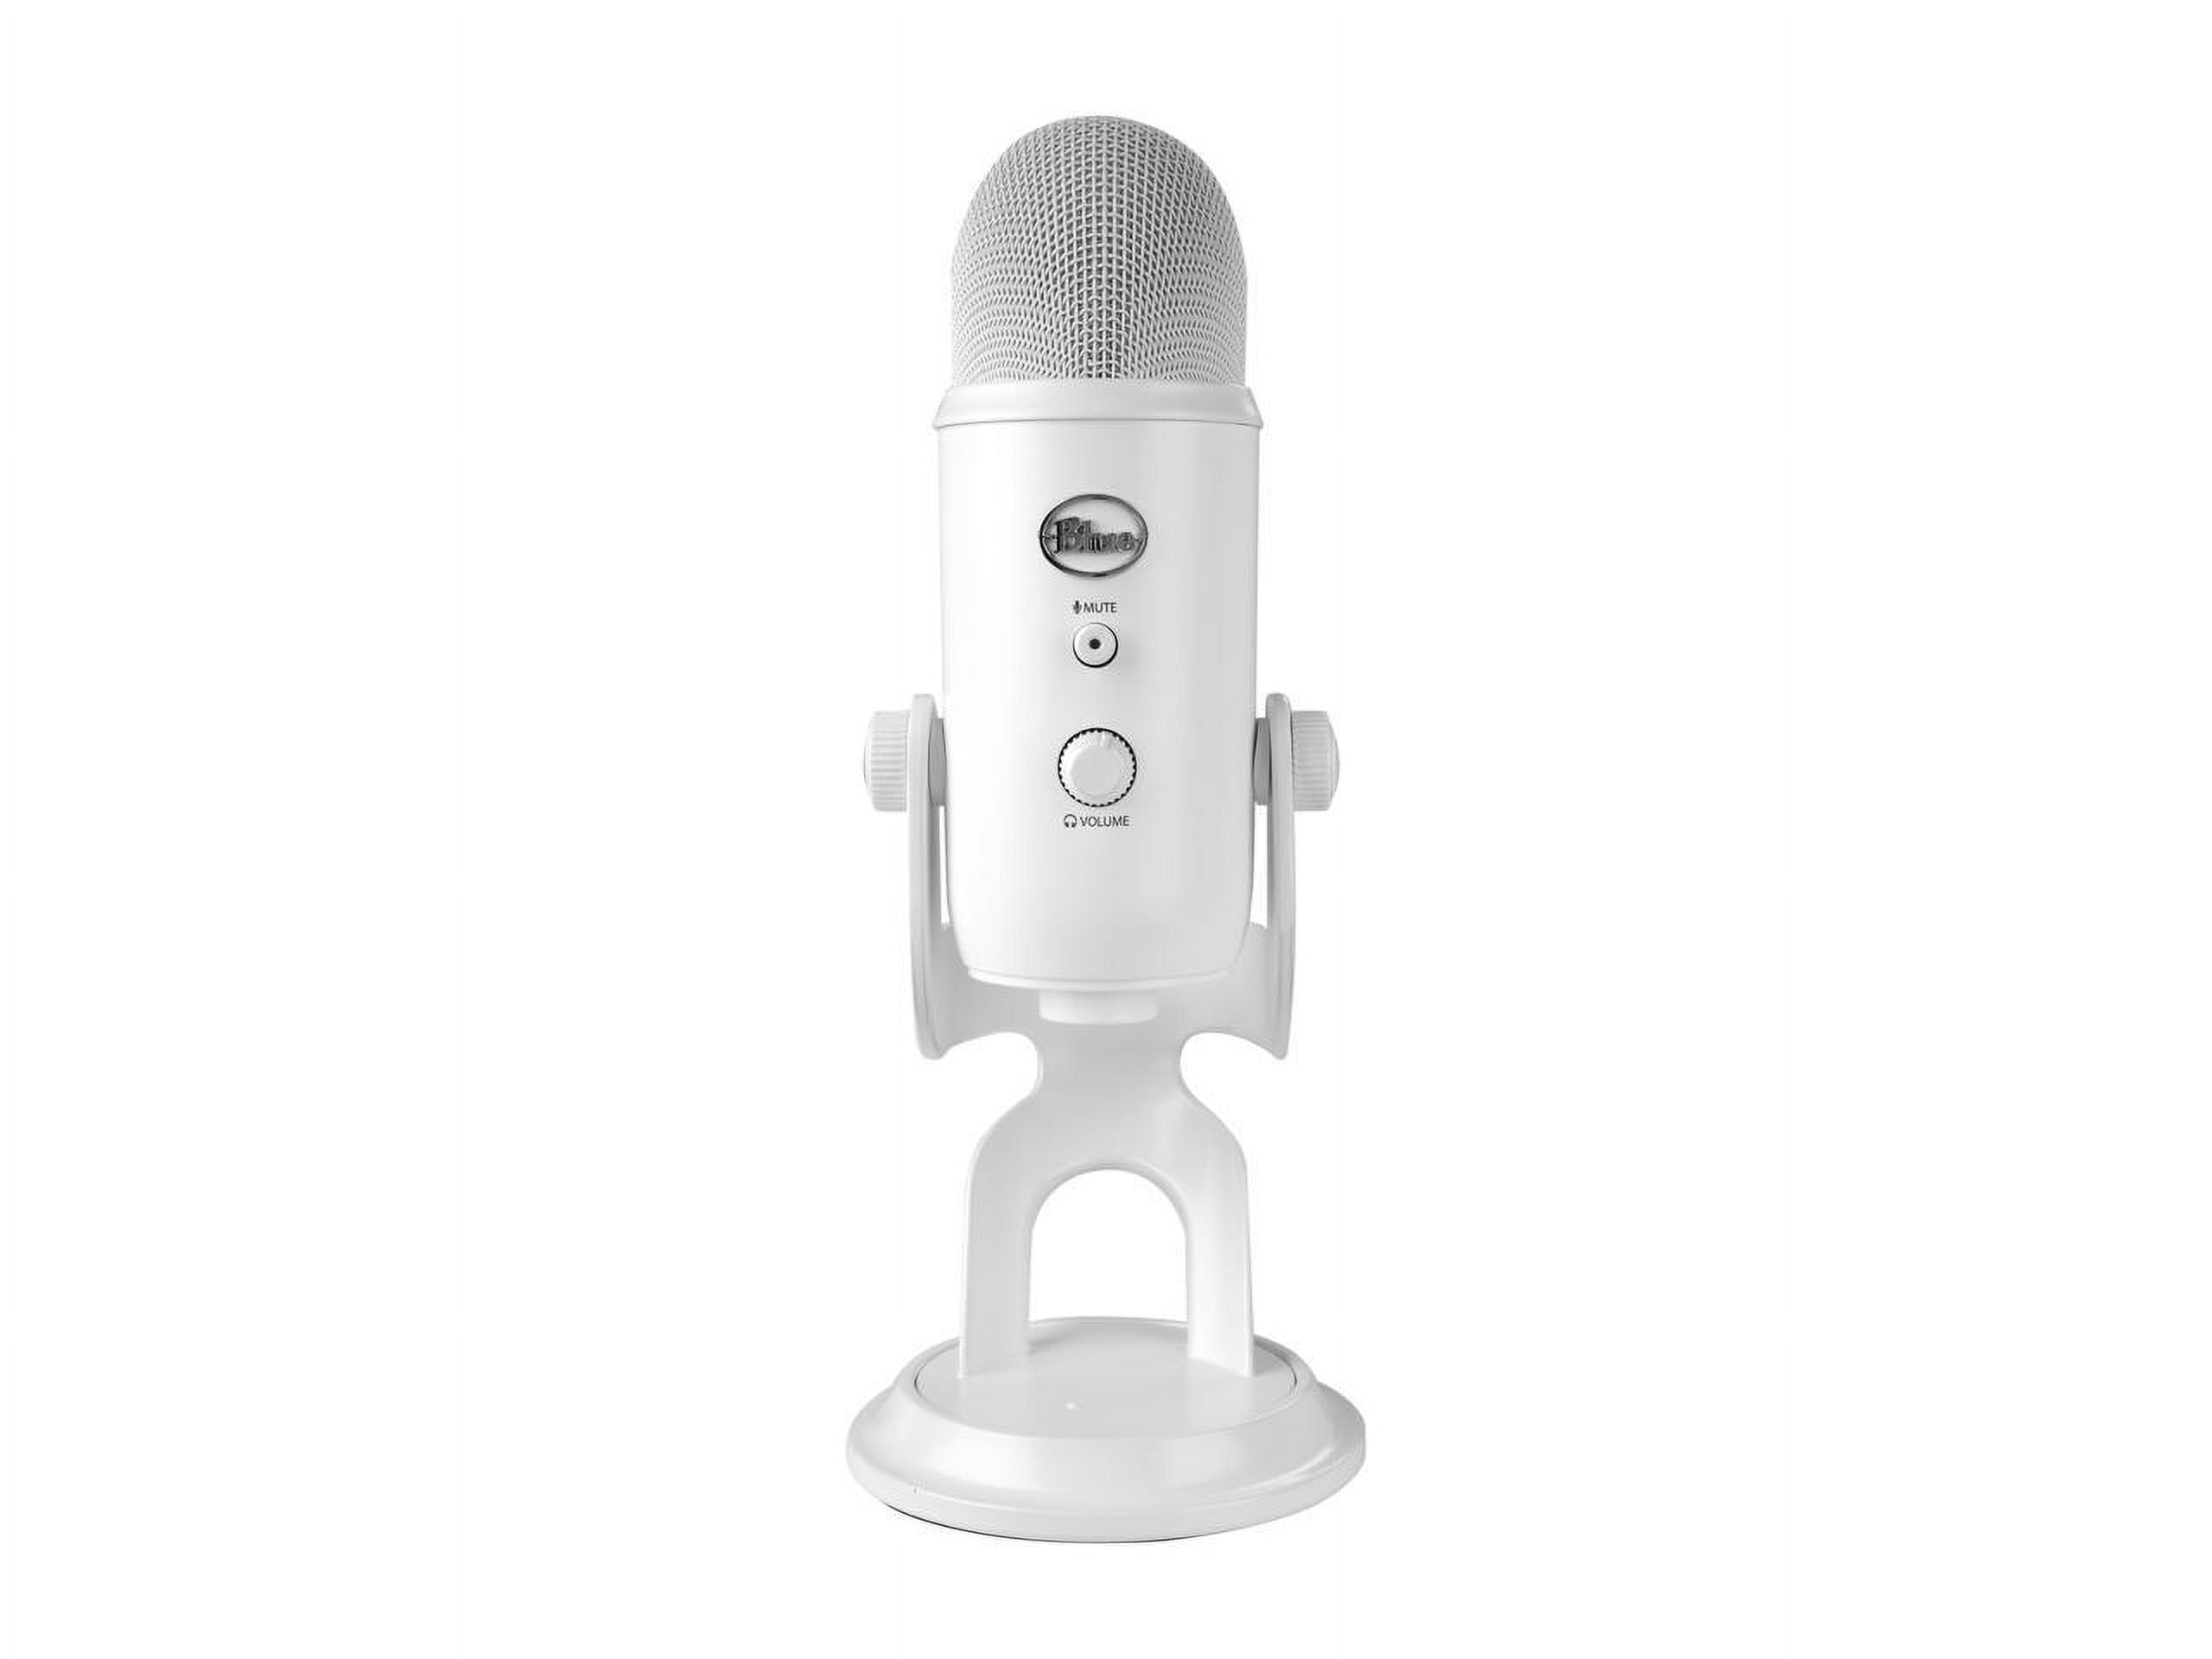 Unboxing] Blue Yeti Whiteout microphone 